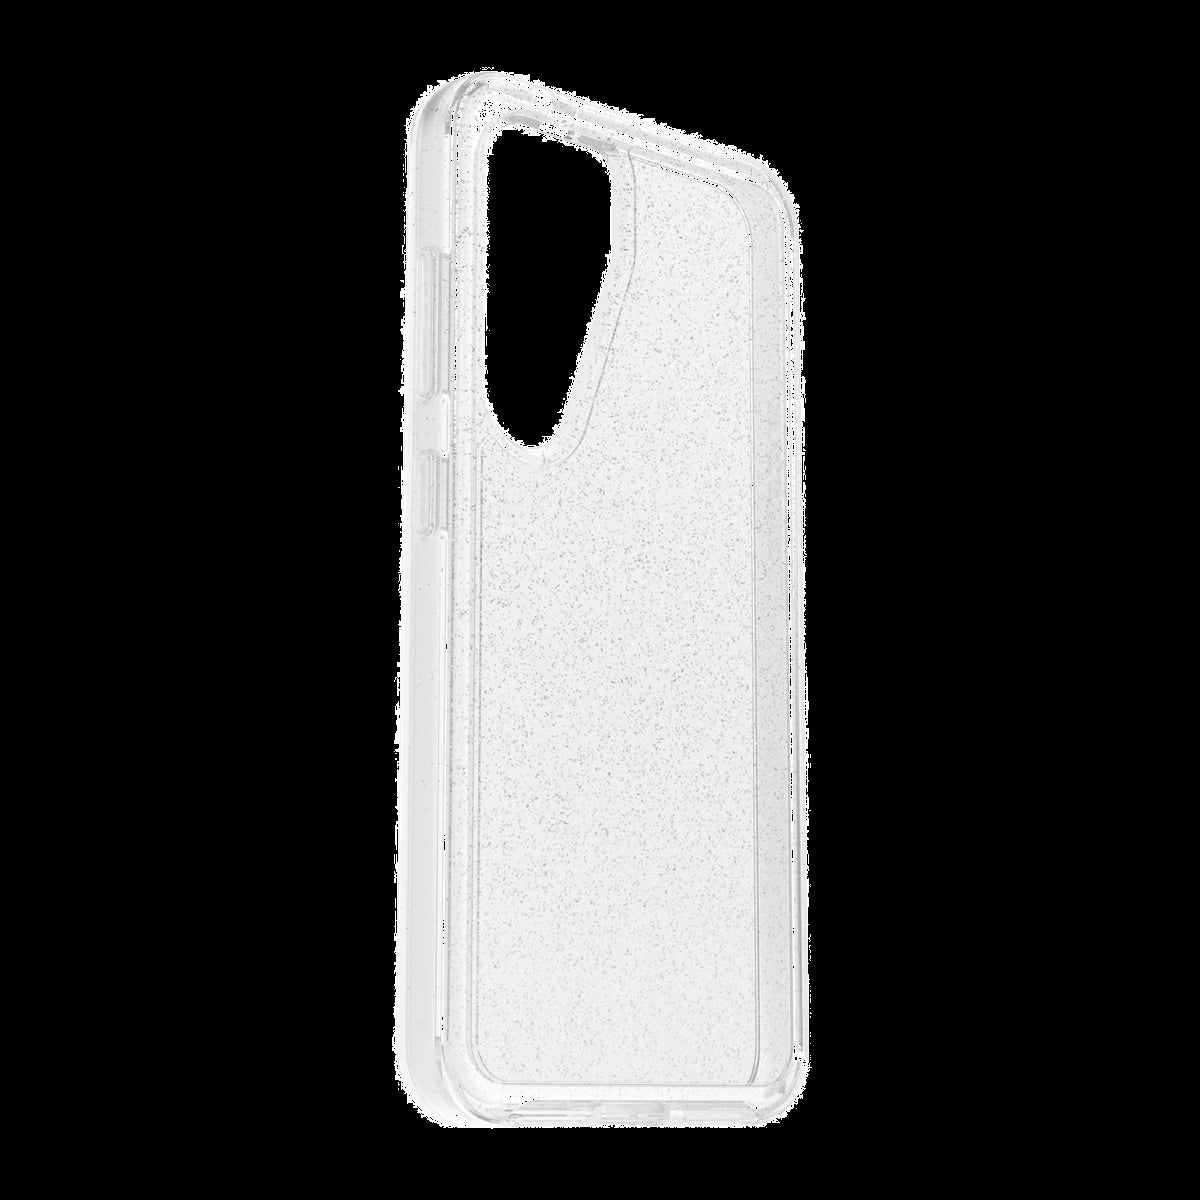 Slim but tough, OtterBox Symmetry Series offers style and protection in a one-piece design that slips on and off in a flash.